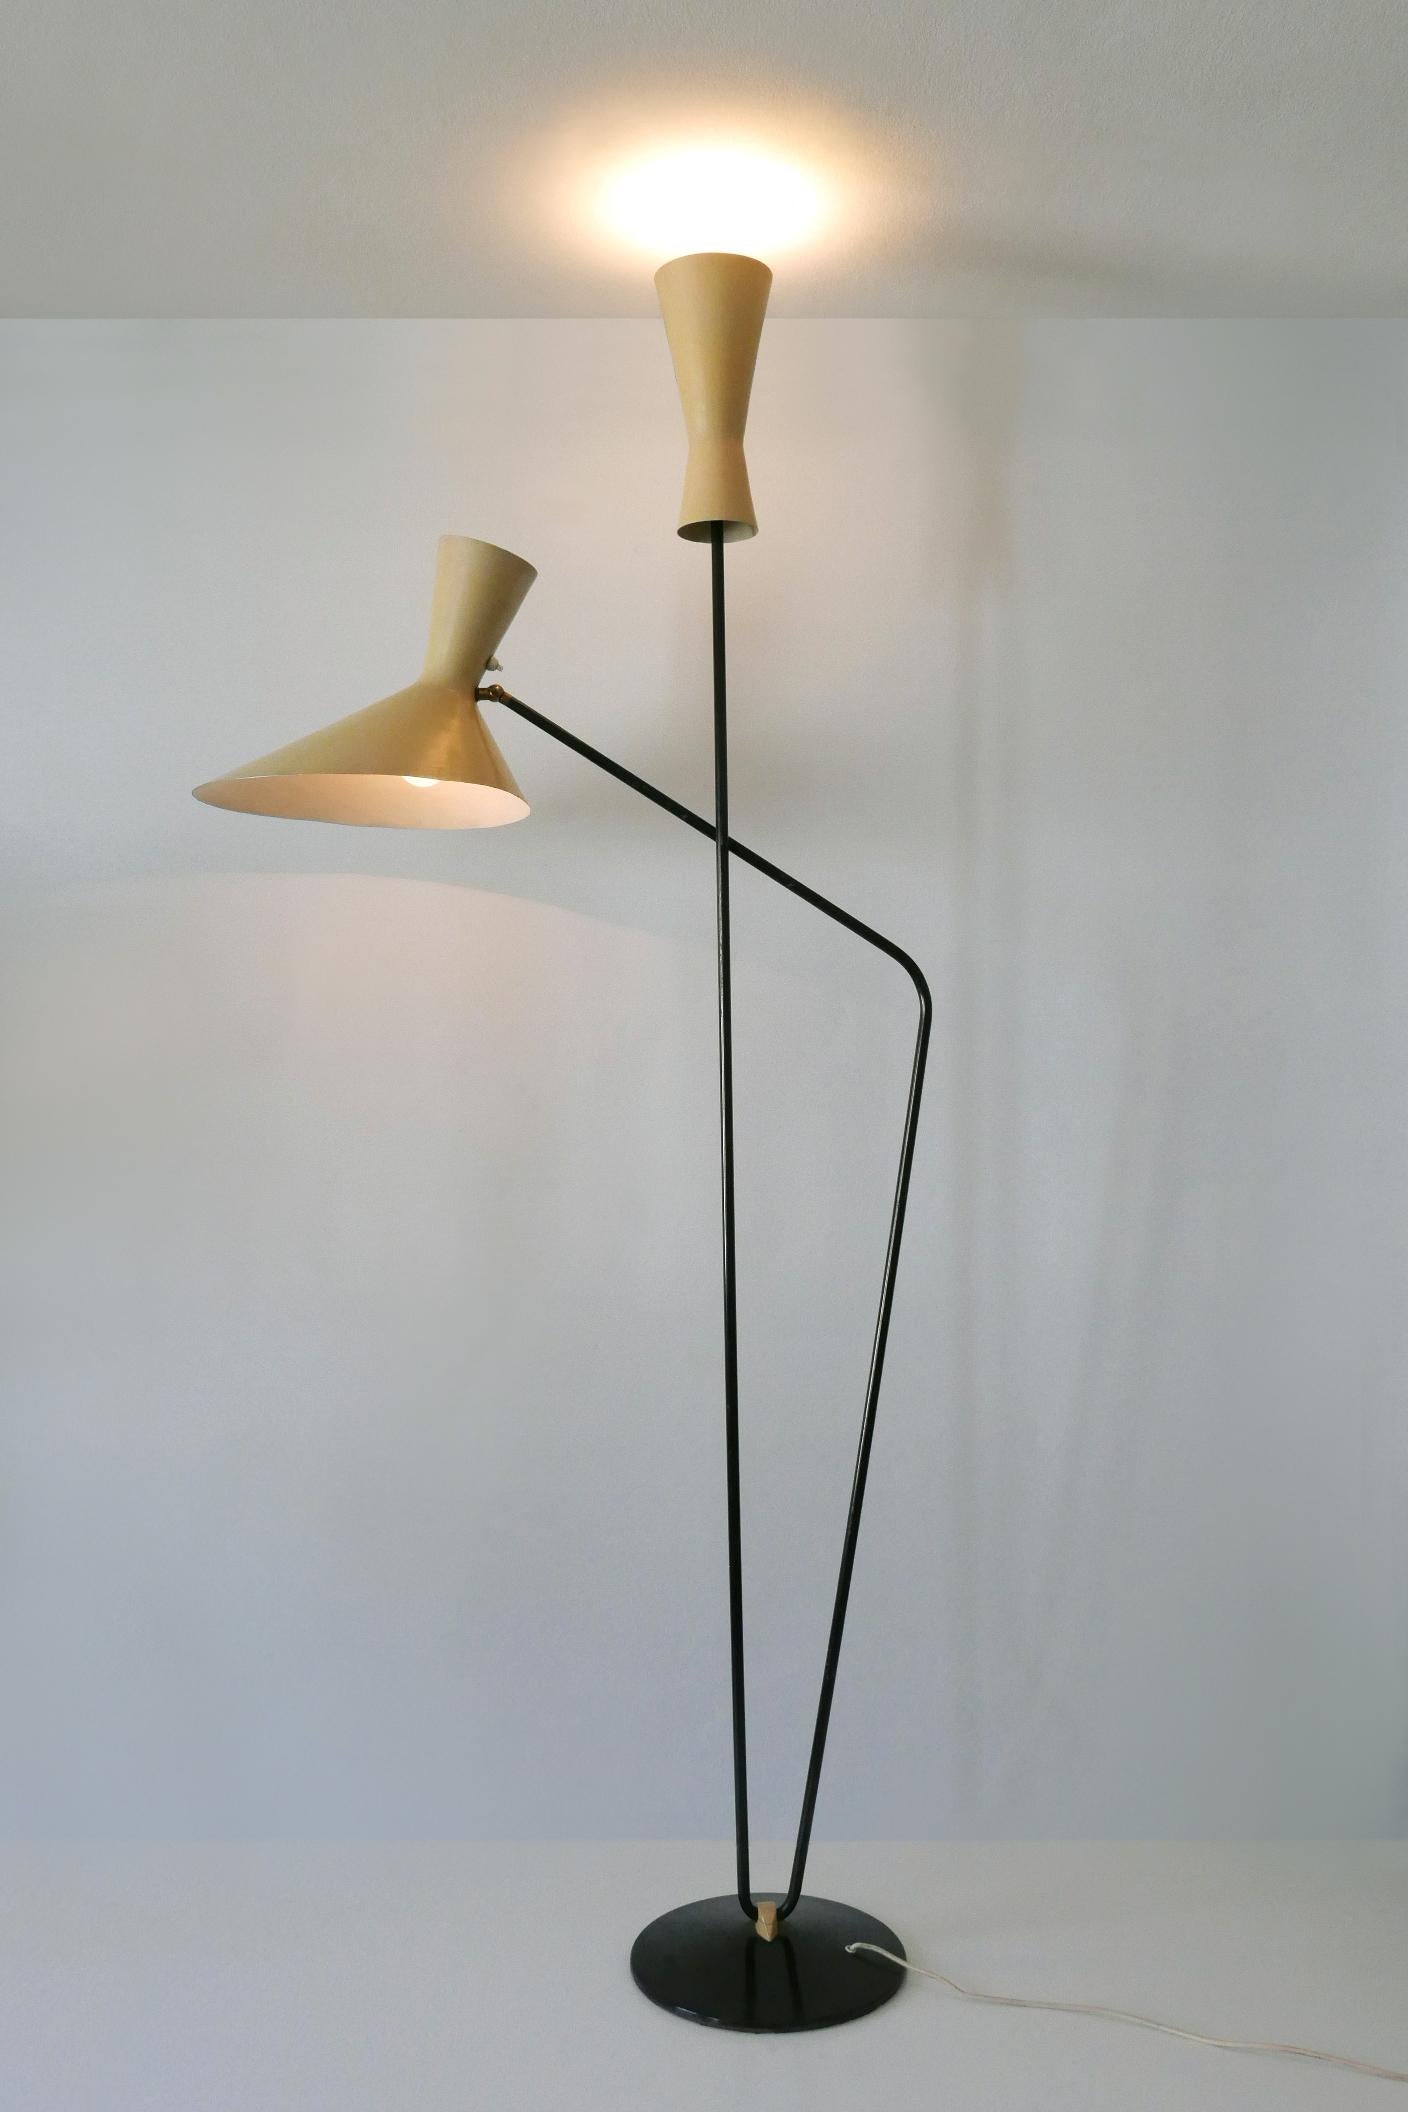 Rare Iconic Mid-Century Modern Floor Lamp by Prof. Carl Moor for BAG Turgi 1950s For Sale 4